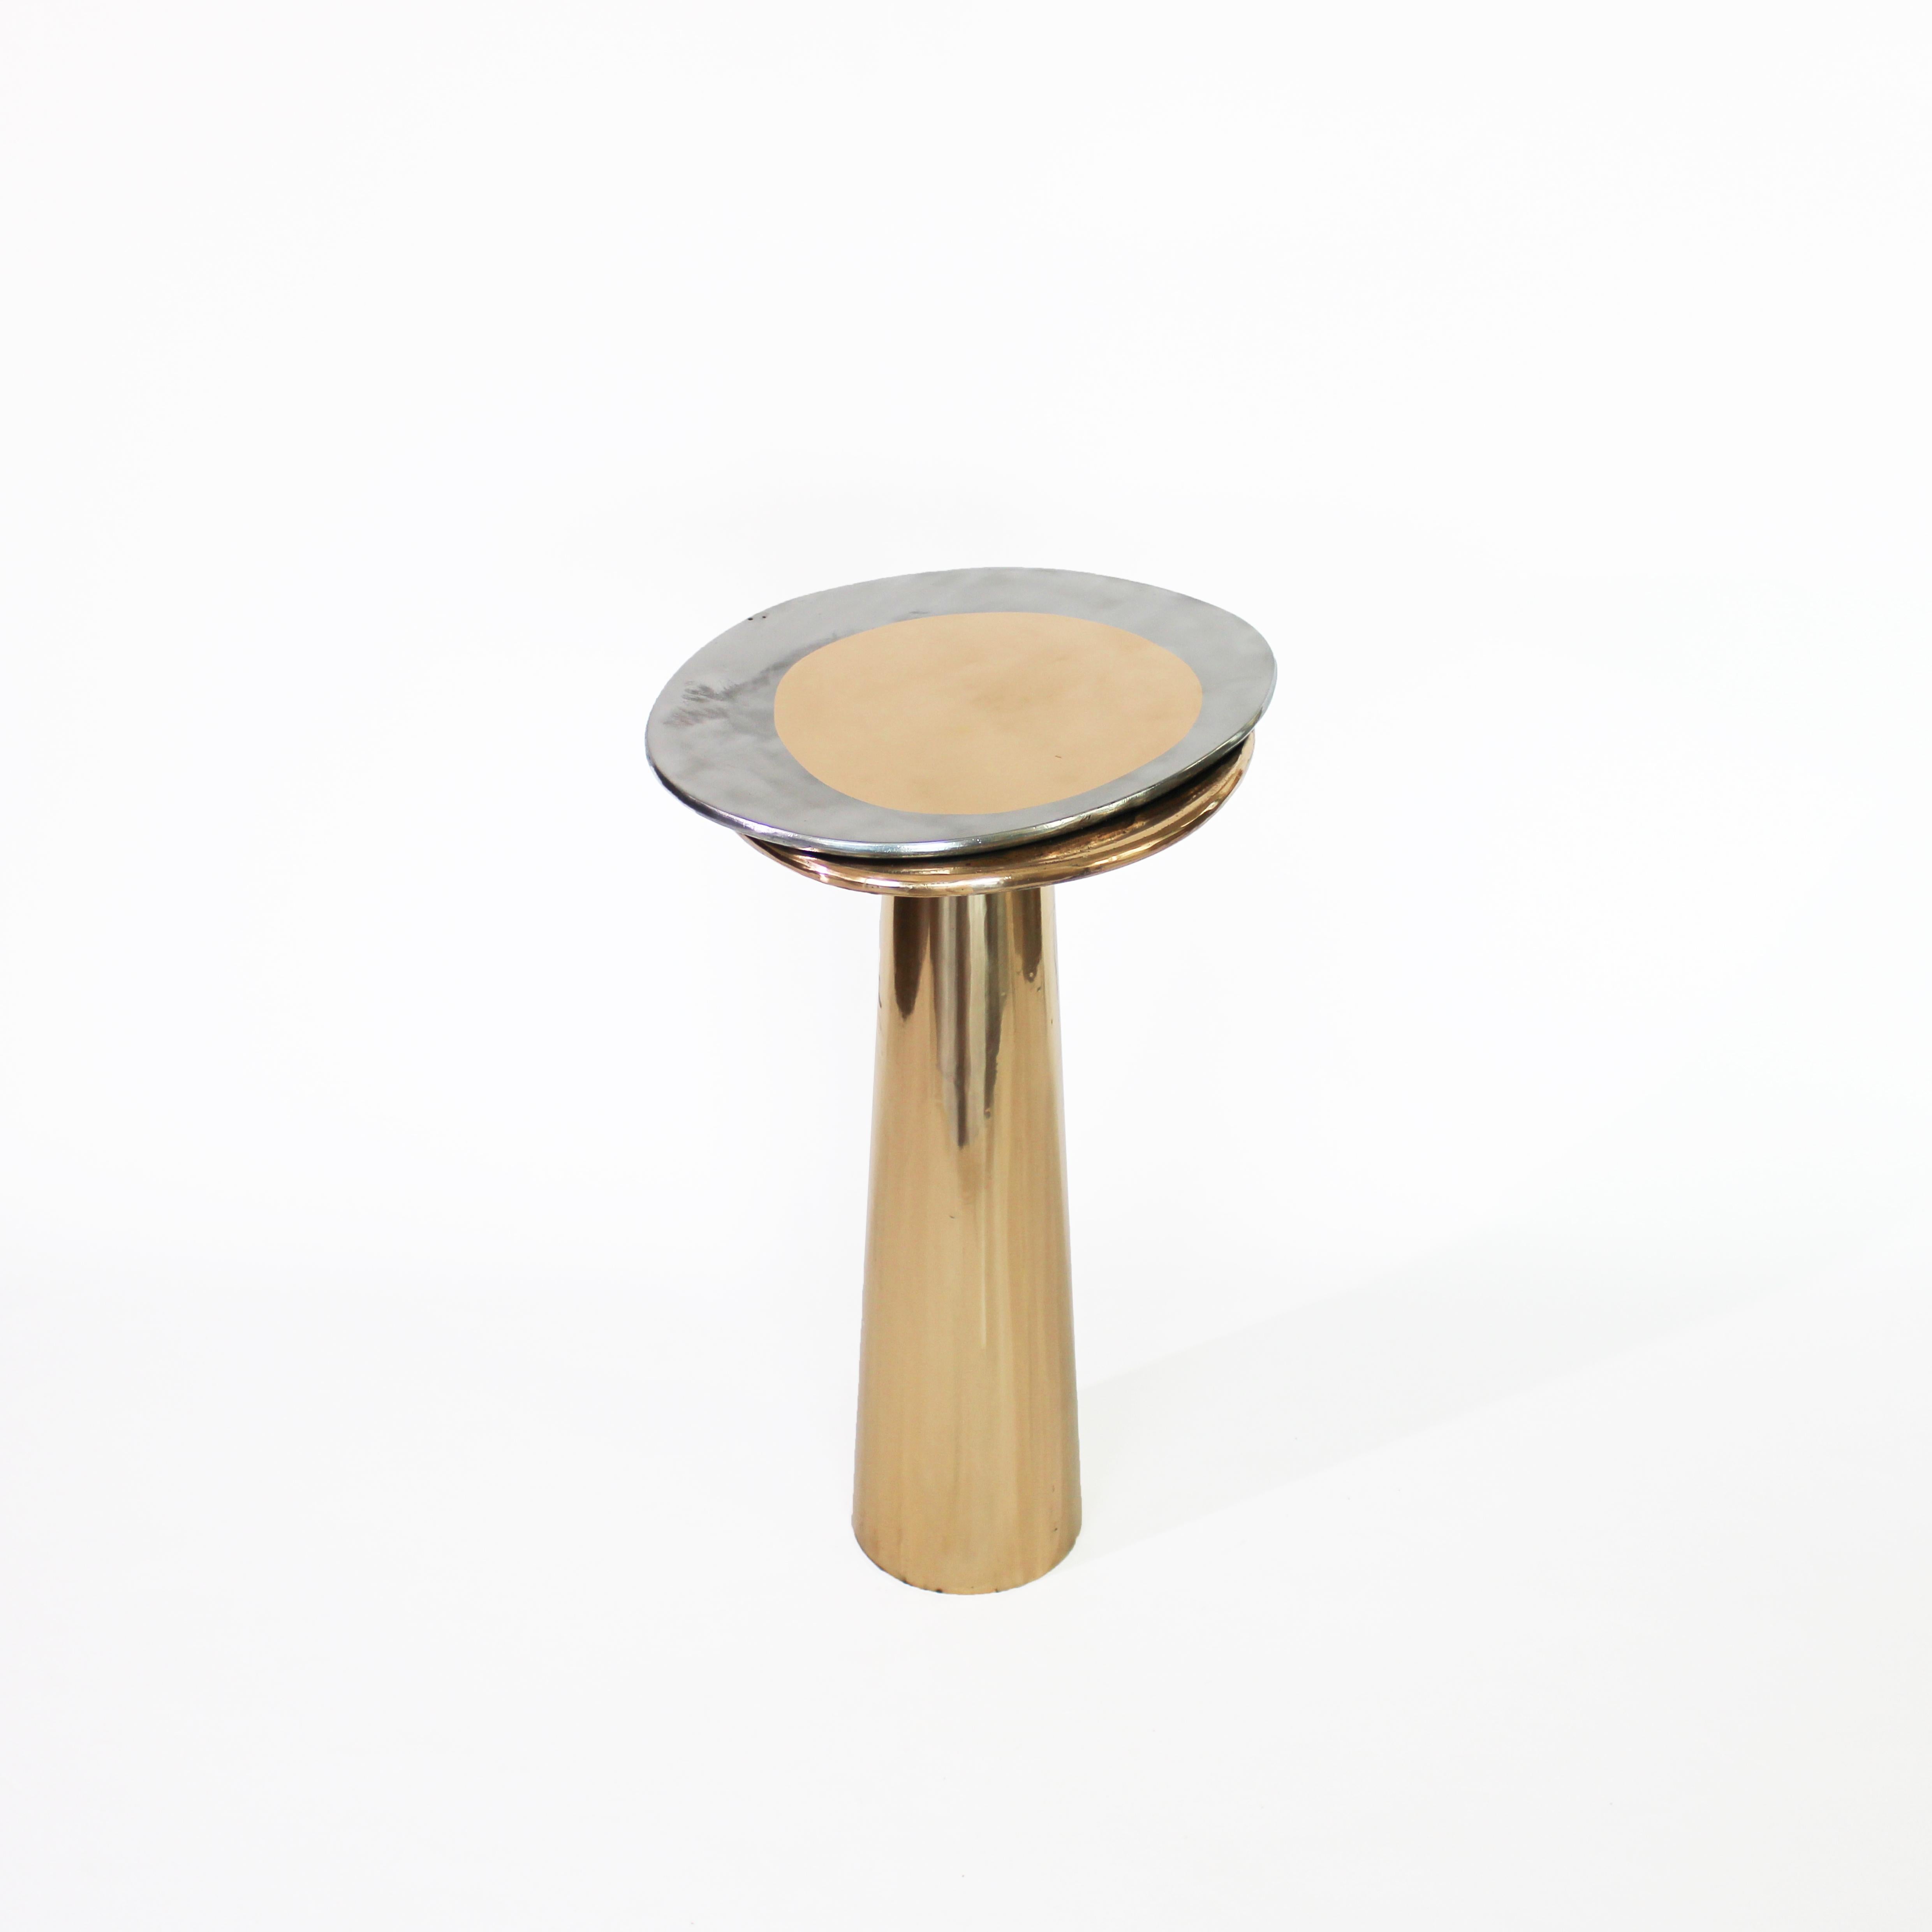 The Cone Table is inspired by the interconnections between the elements and life forms. 
The conical shape of the base, the asymmetrical form of the top, and the rounded edges provide the table with a silky appearance.

Cone Table, made of bronze